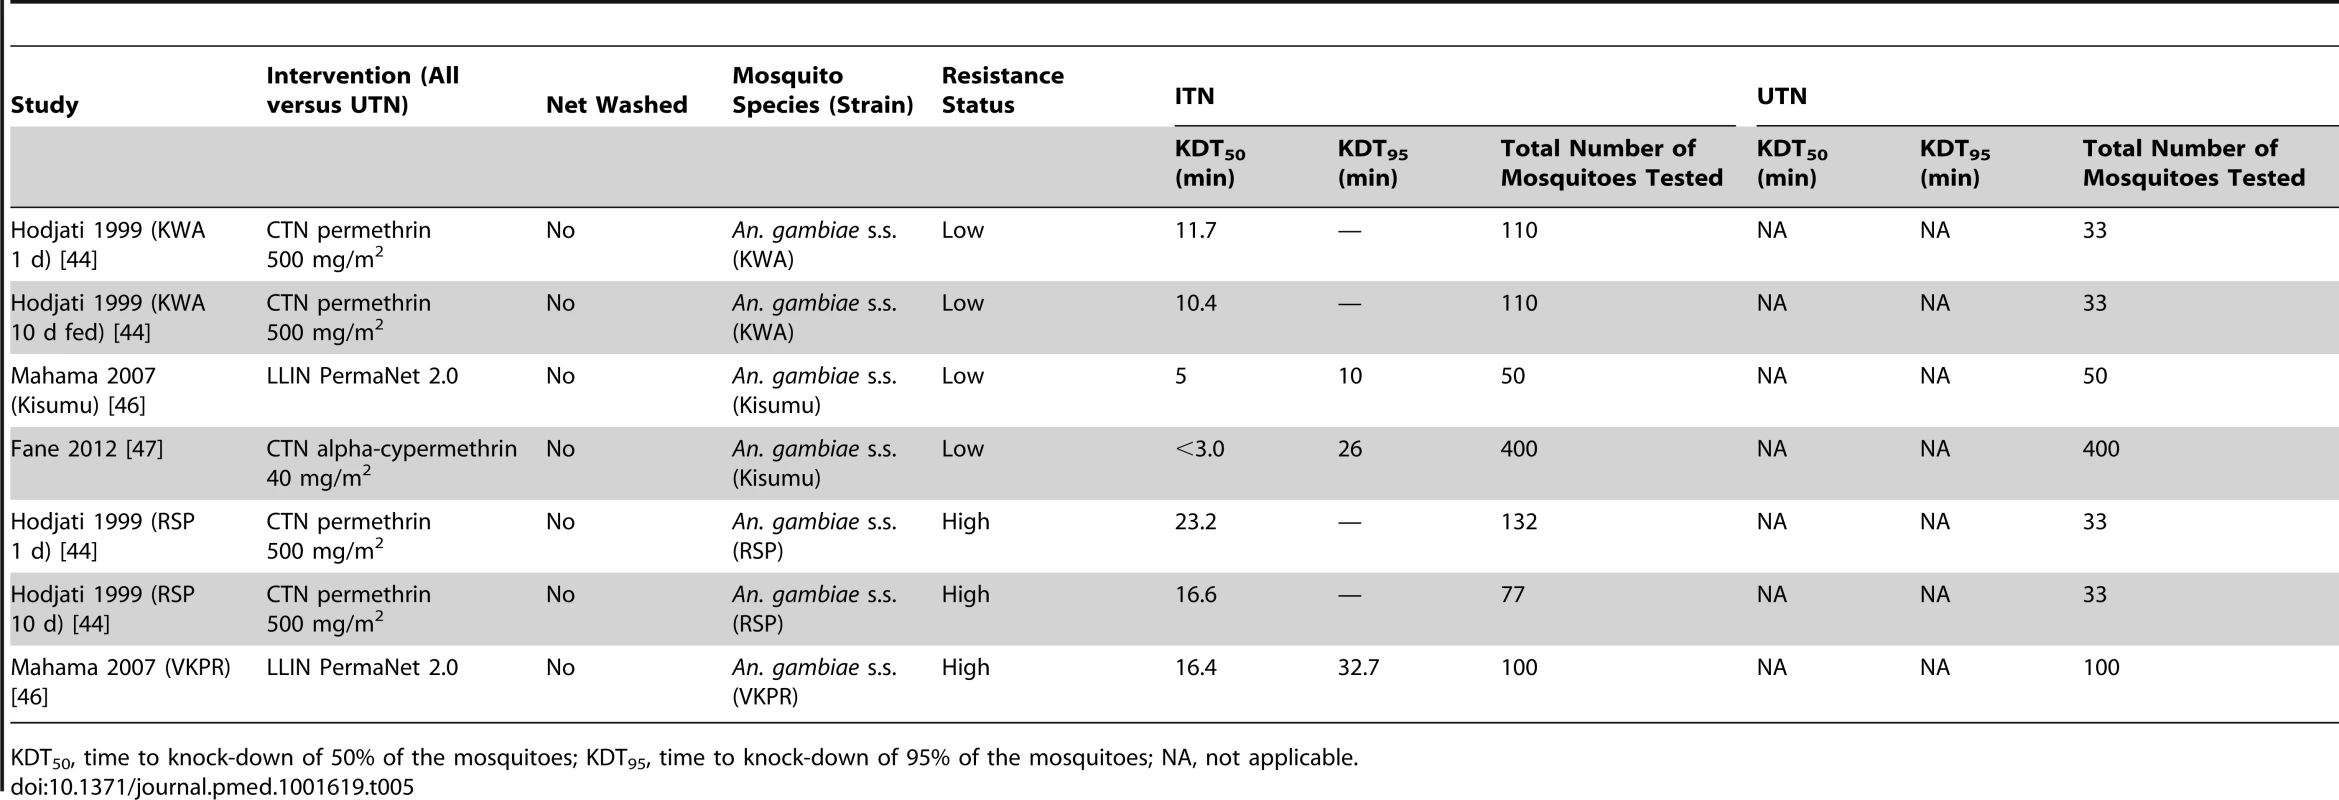 Results from cone tests comparing LLIN or CTN versus UTN for time to 50% and 95% knock-down.